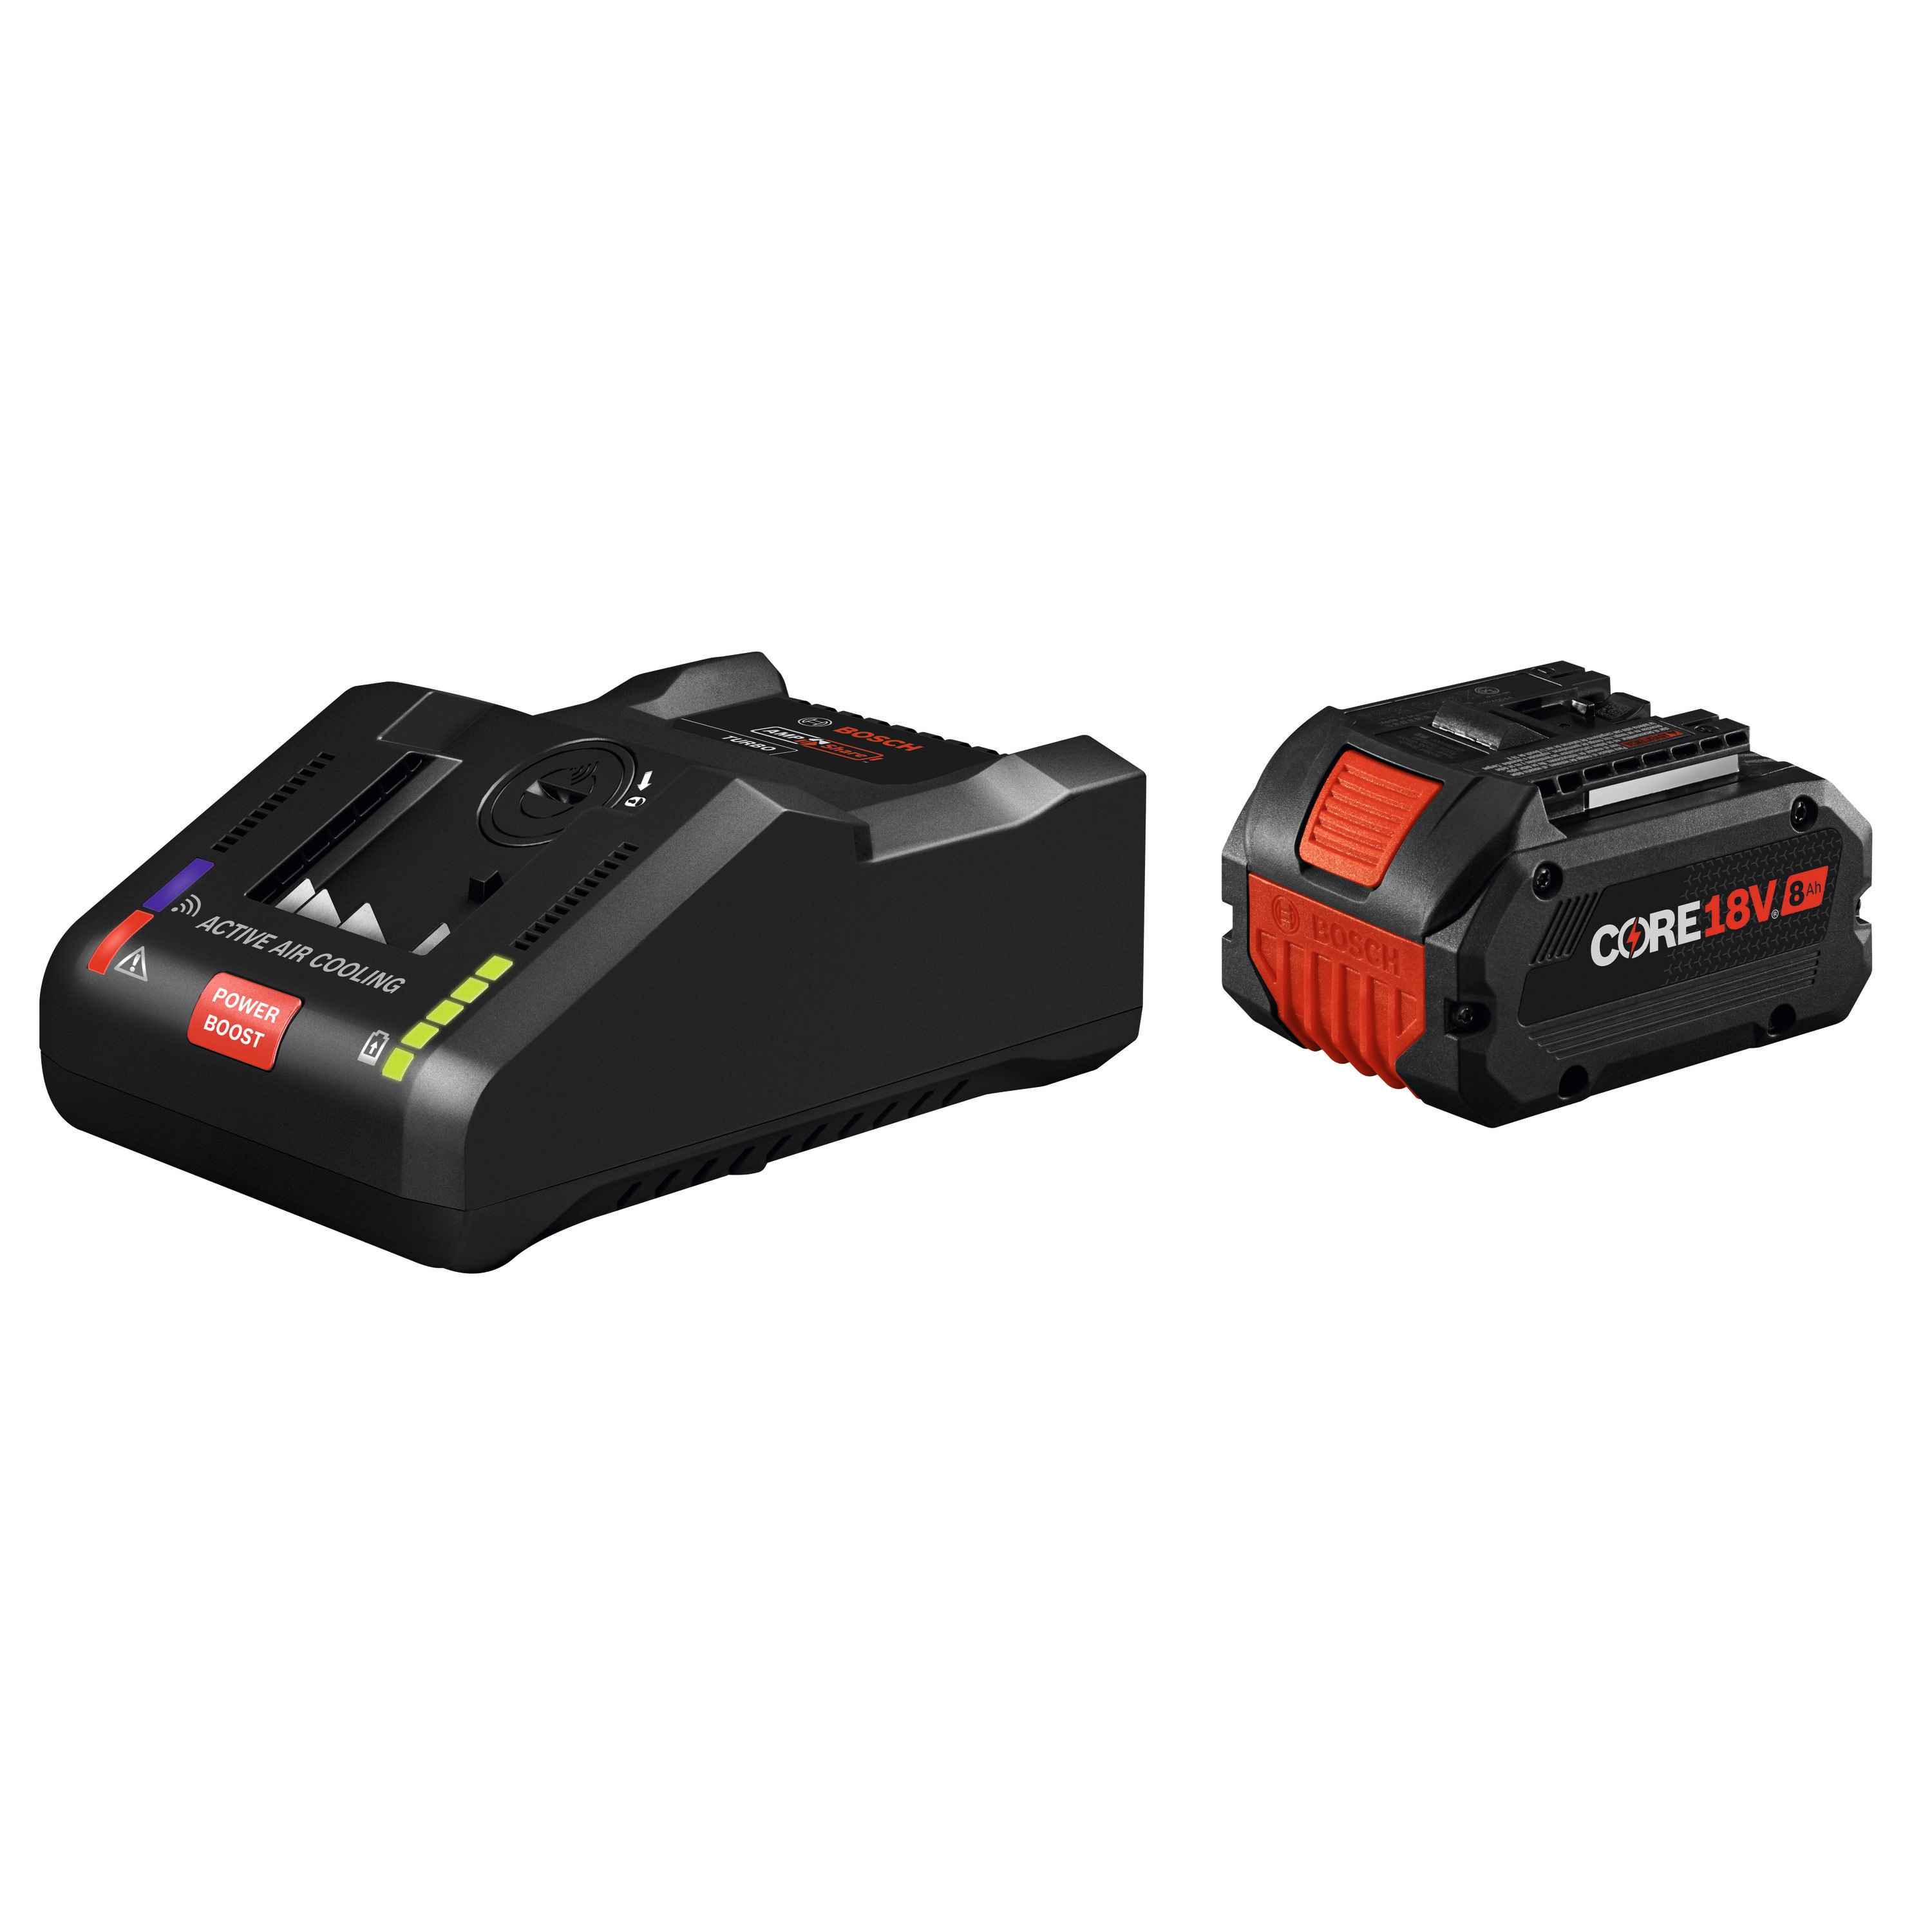 Bosch 18-V 8 Amp-Hour; Lithium-ion Battery Charger (Charger Included)